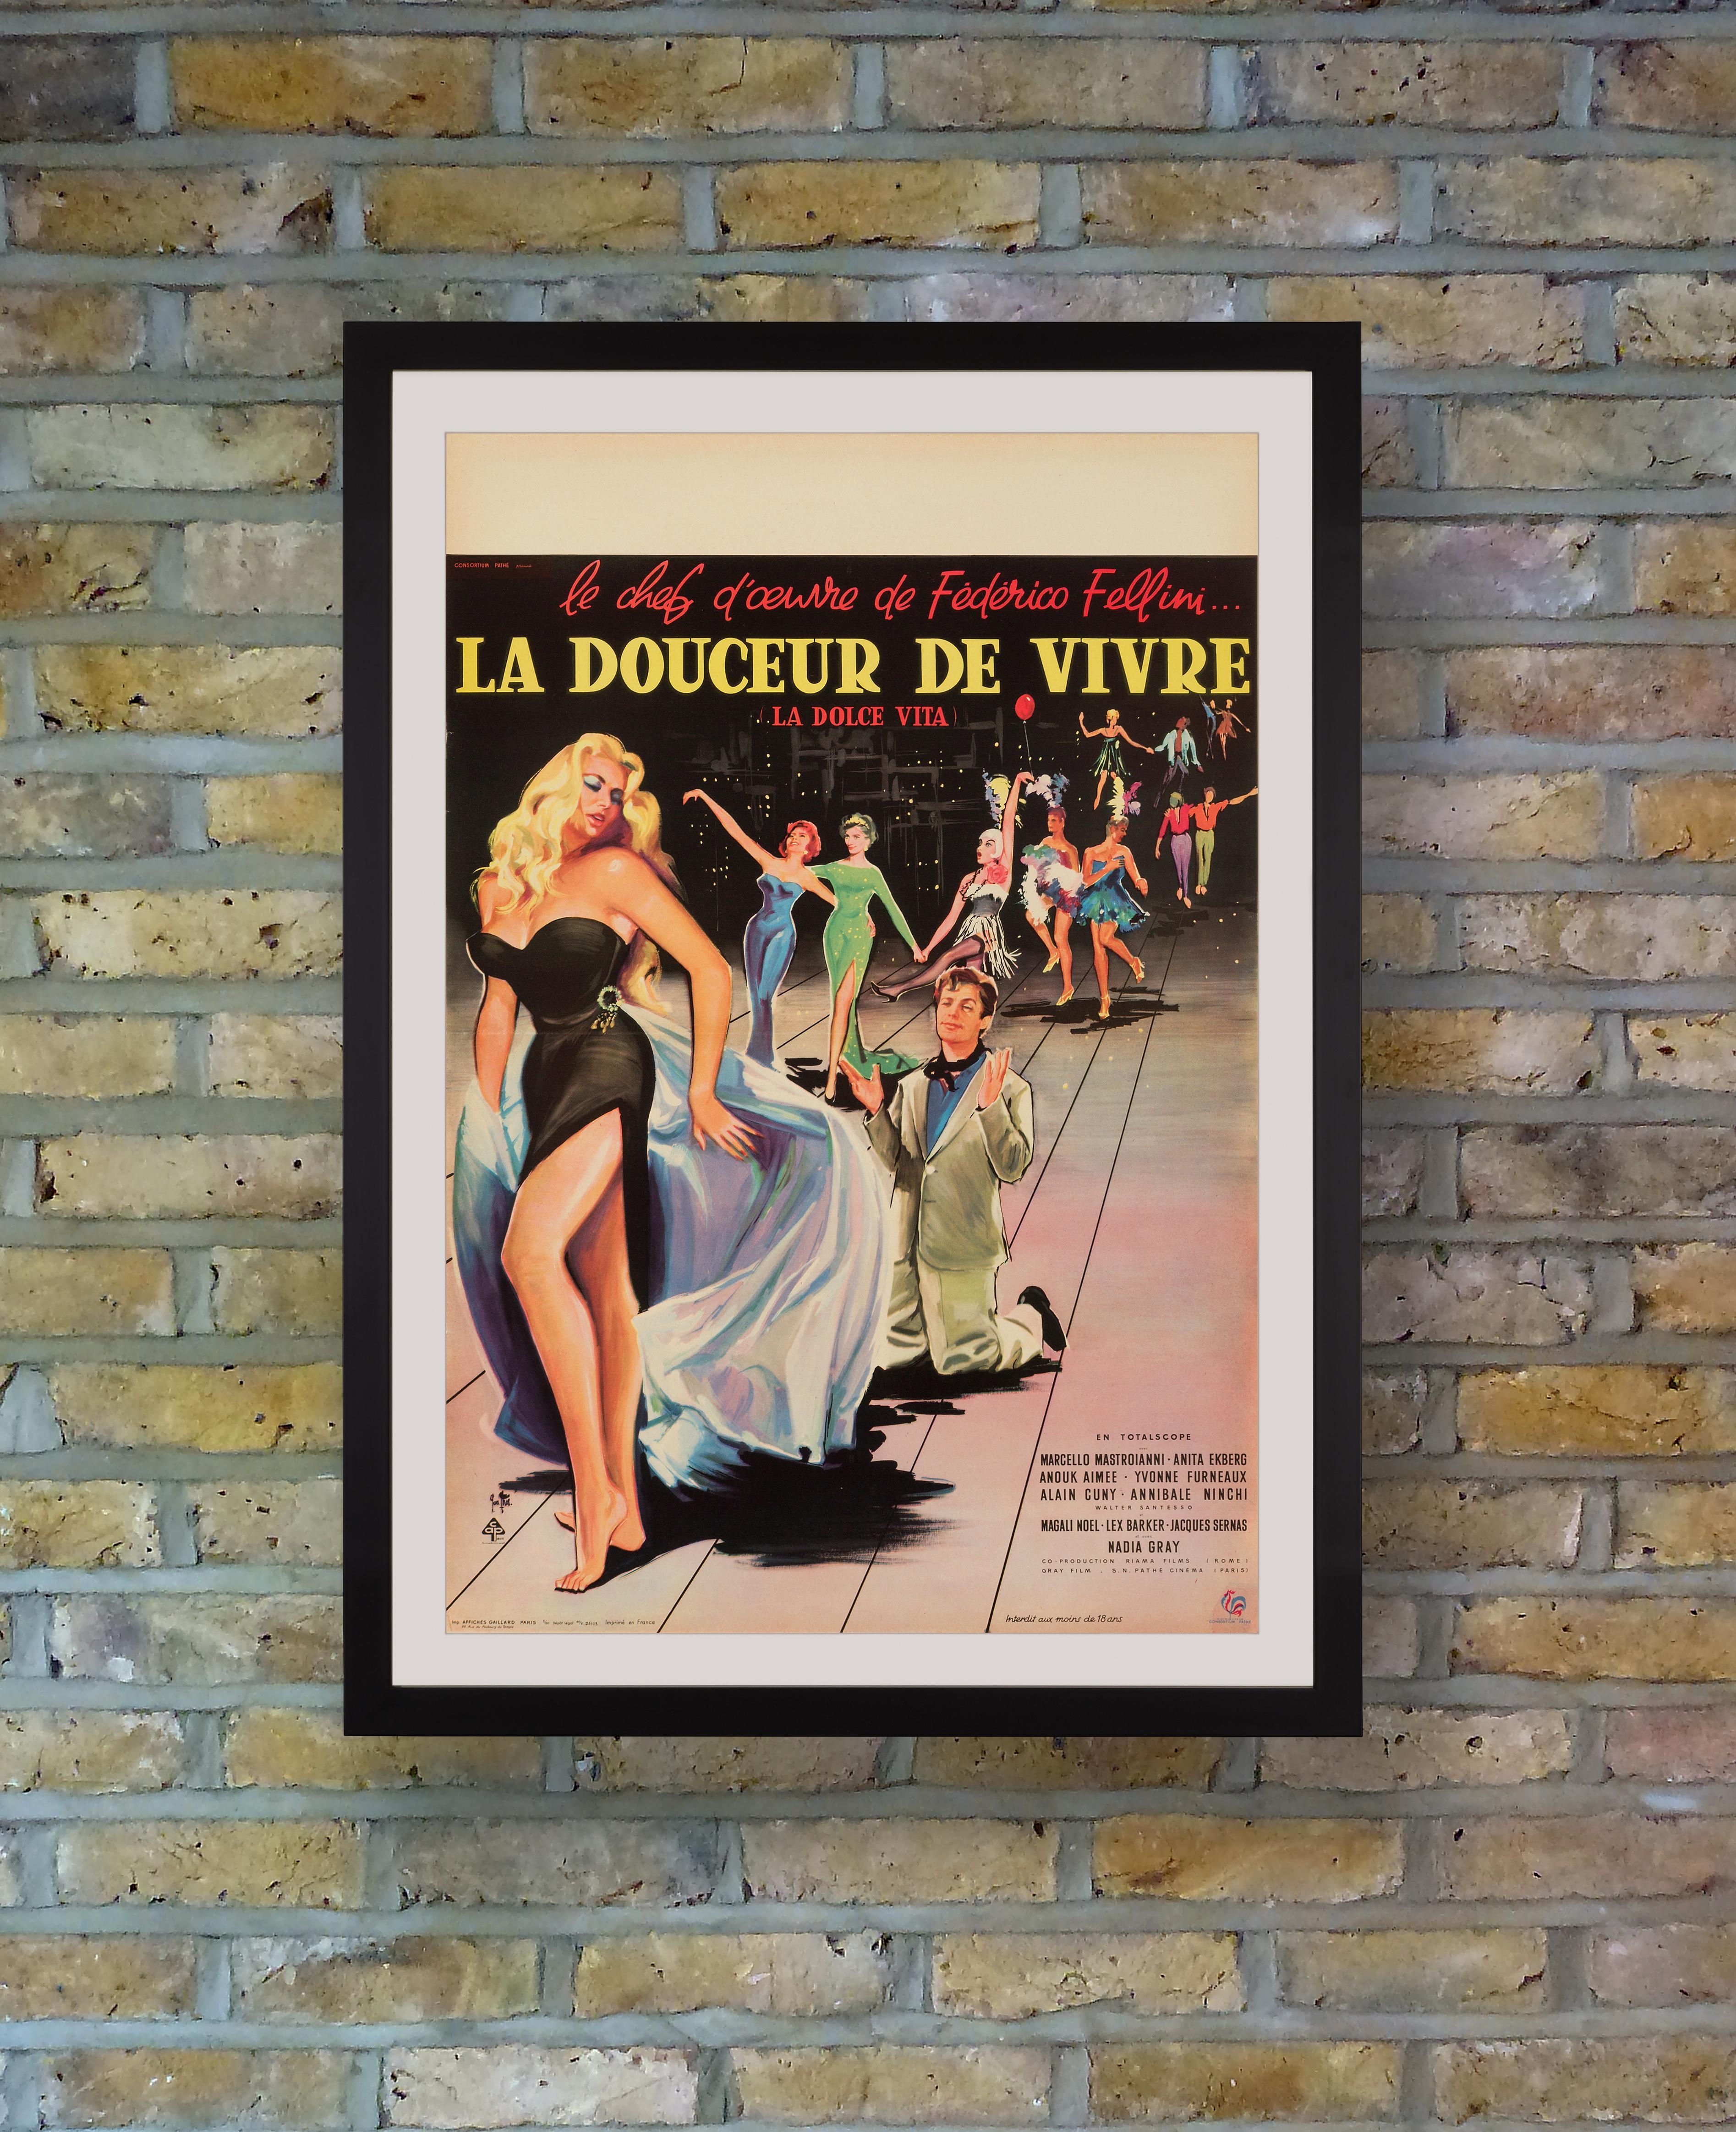 'La Dolce Vita' Original Vintage French Movie Poster by Yves Thos, 1960 For Sale 1